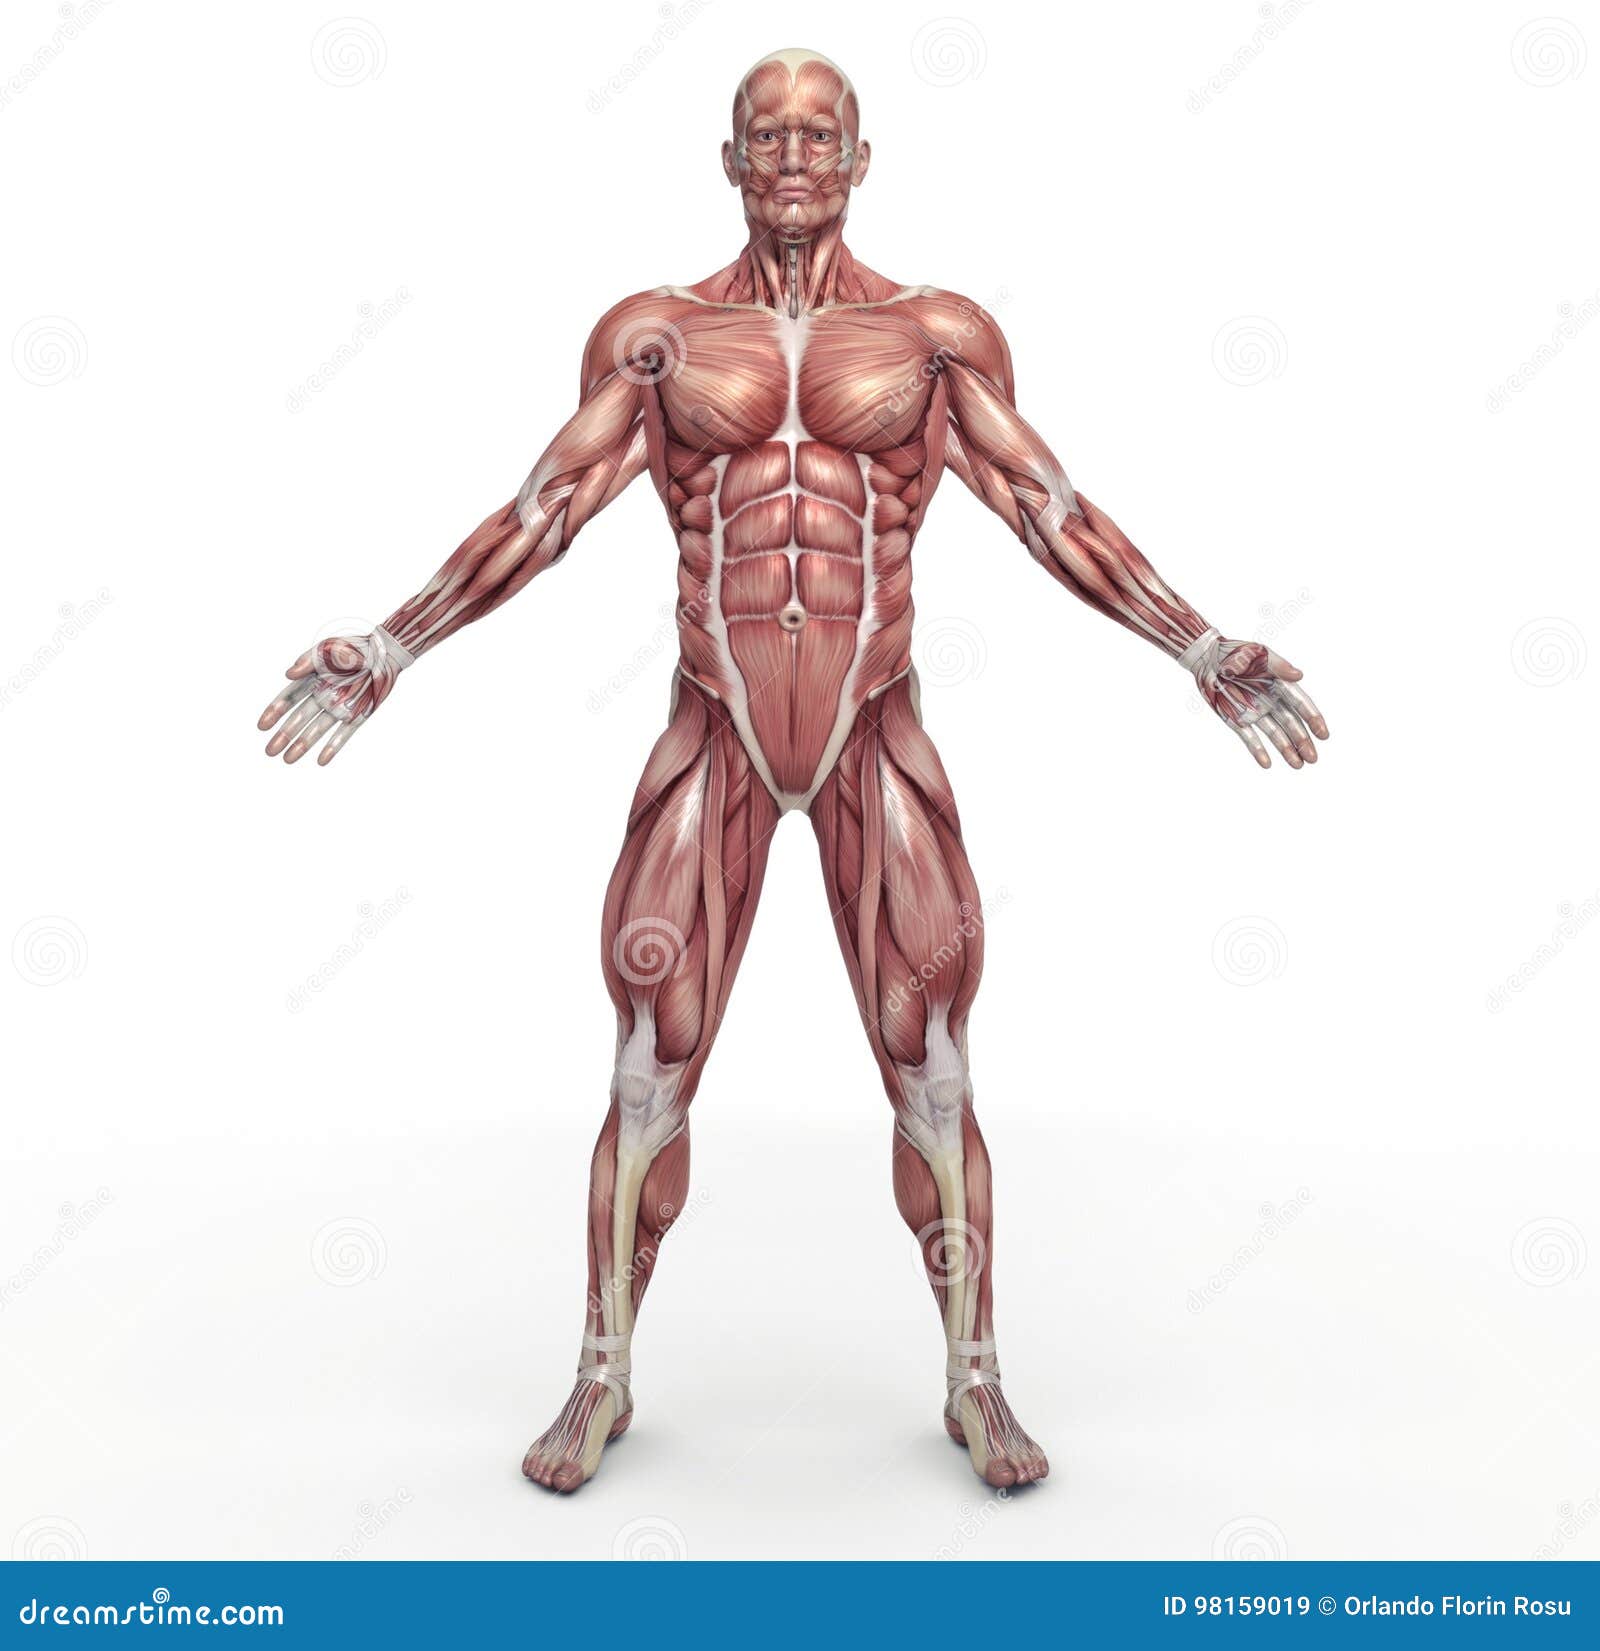 Muscular Cartoons, Illustrations & Vector Stock Images ...